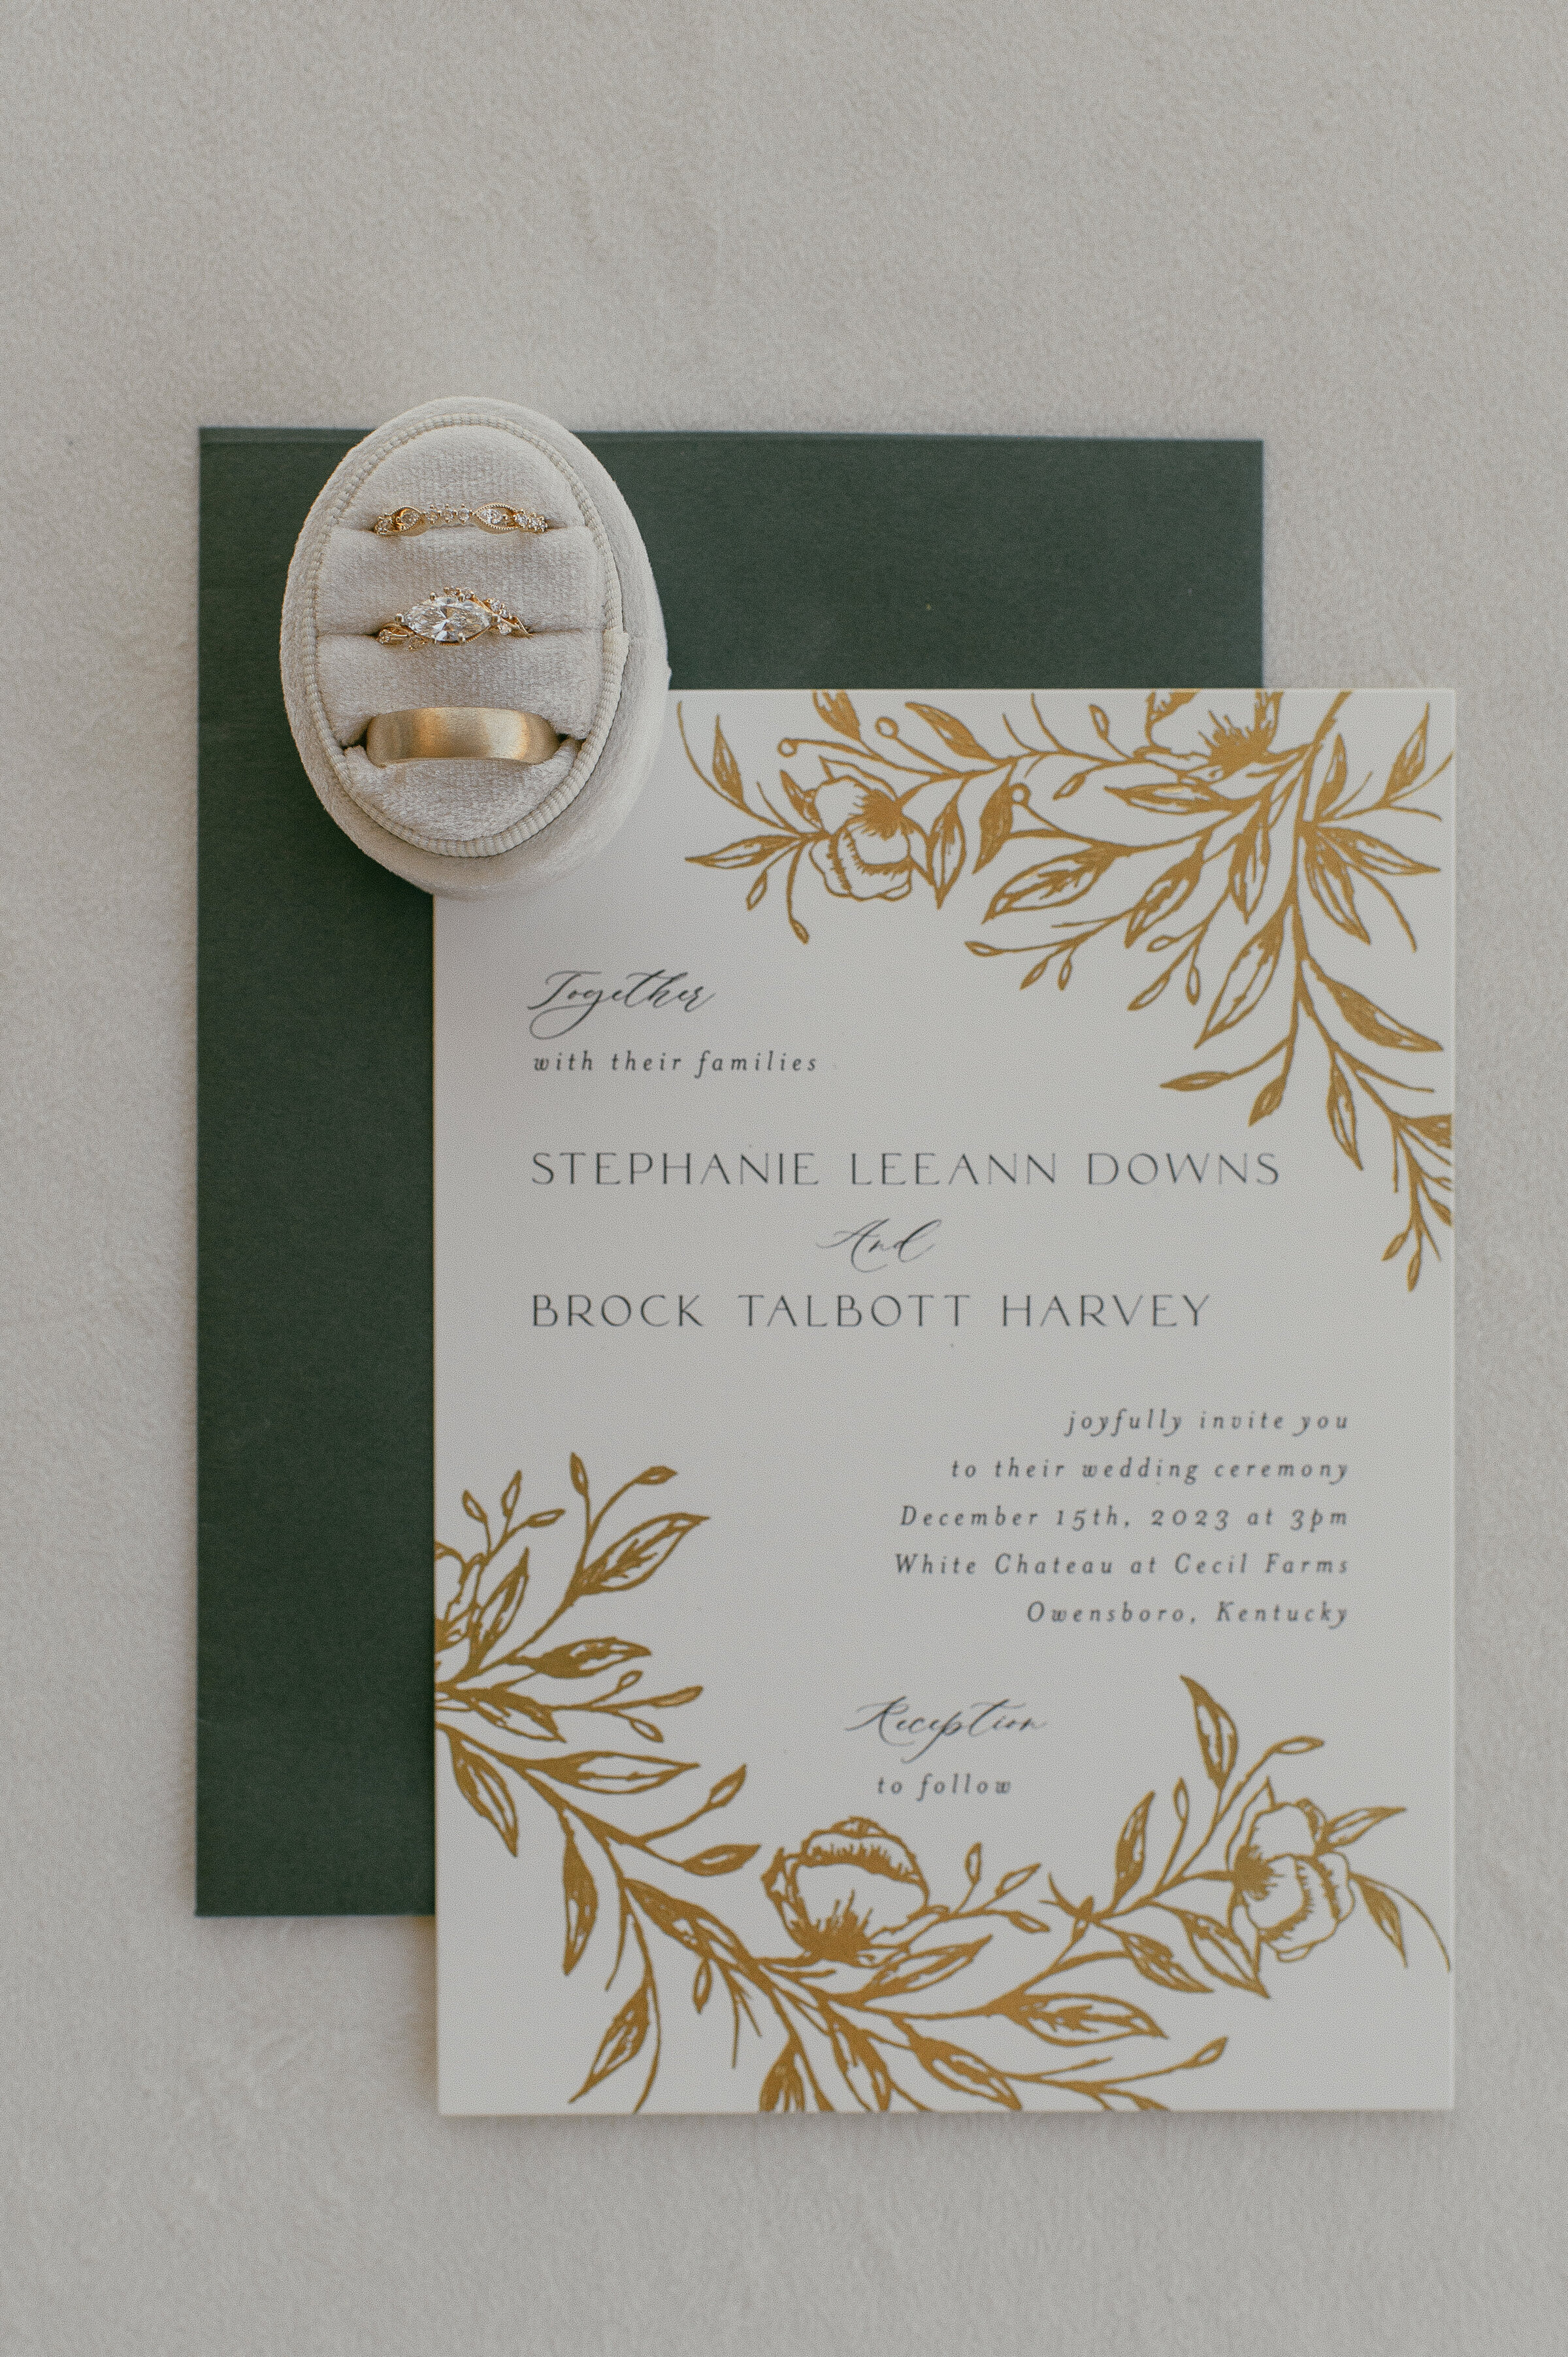 Wedding invitation and rings, showcasing the couple's names and wedding details.